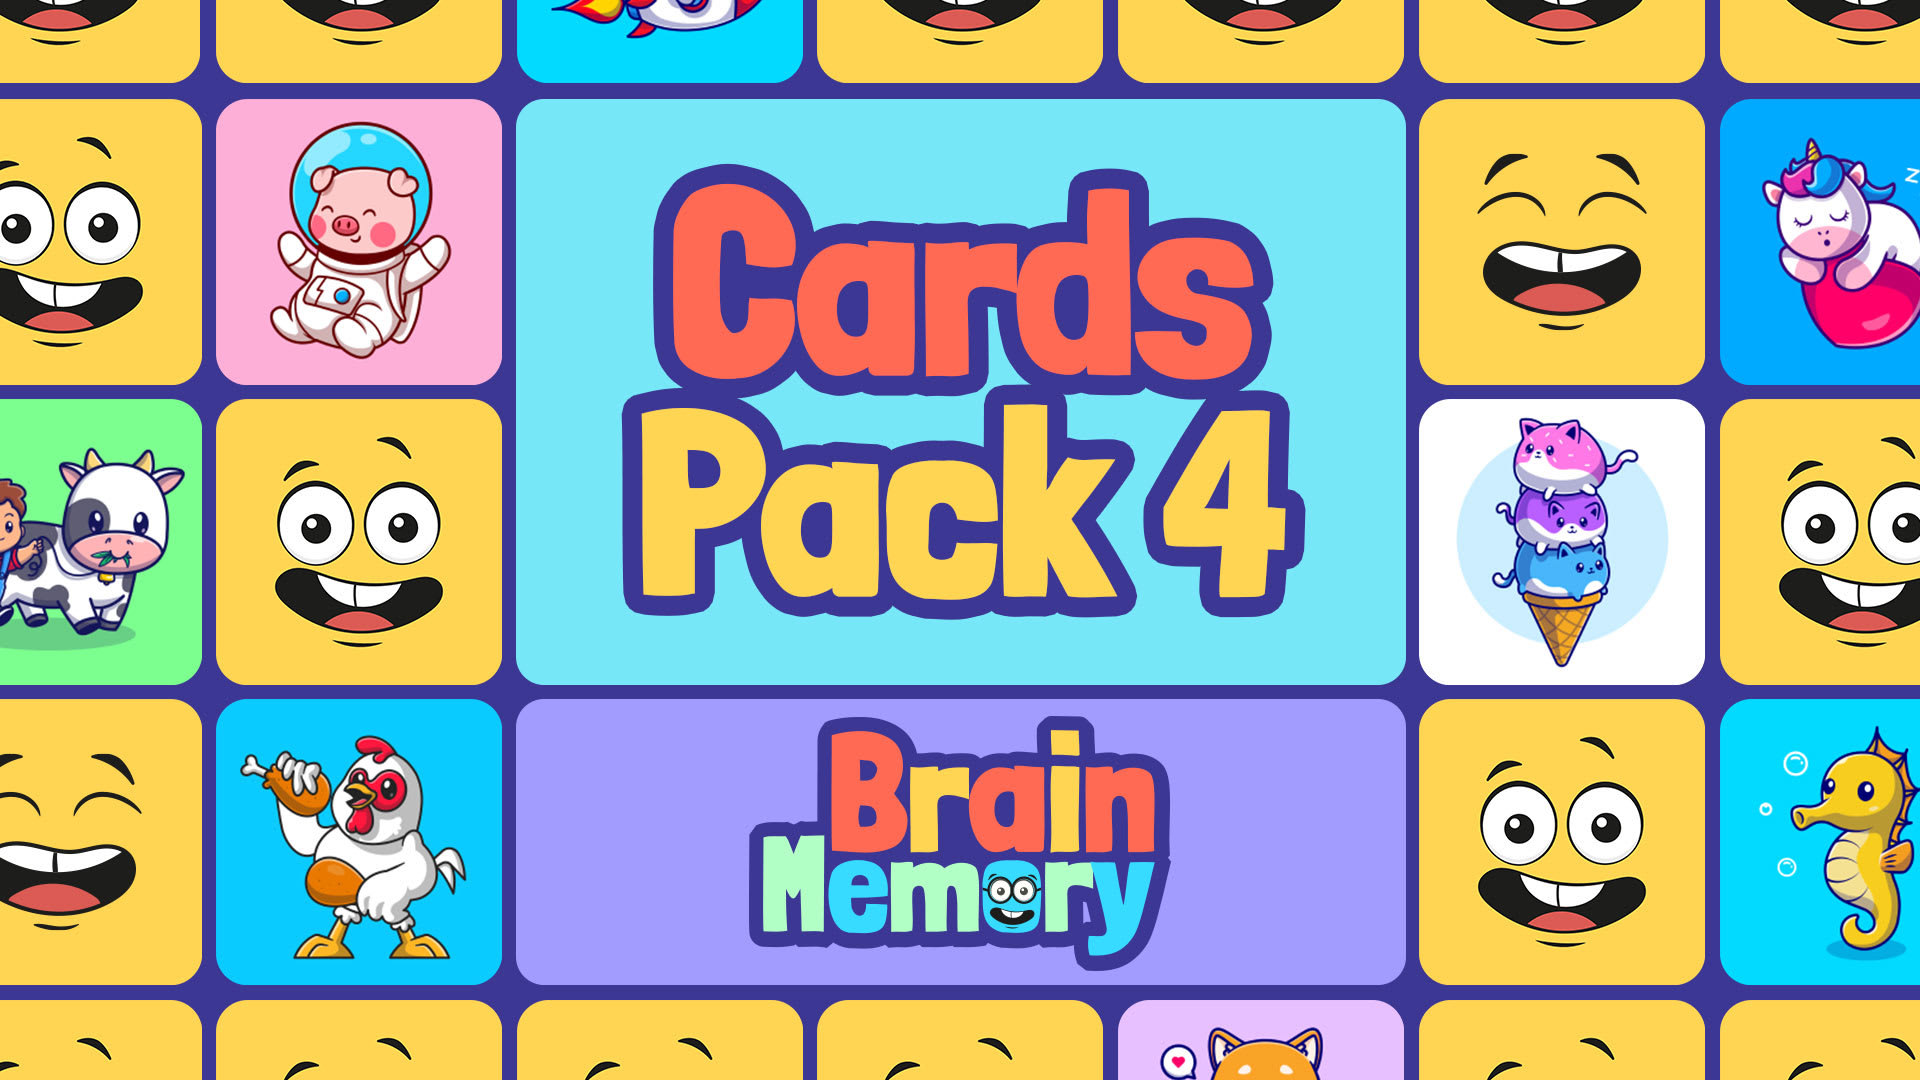 Cards Pack 4